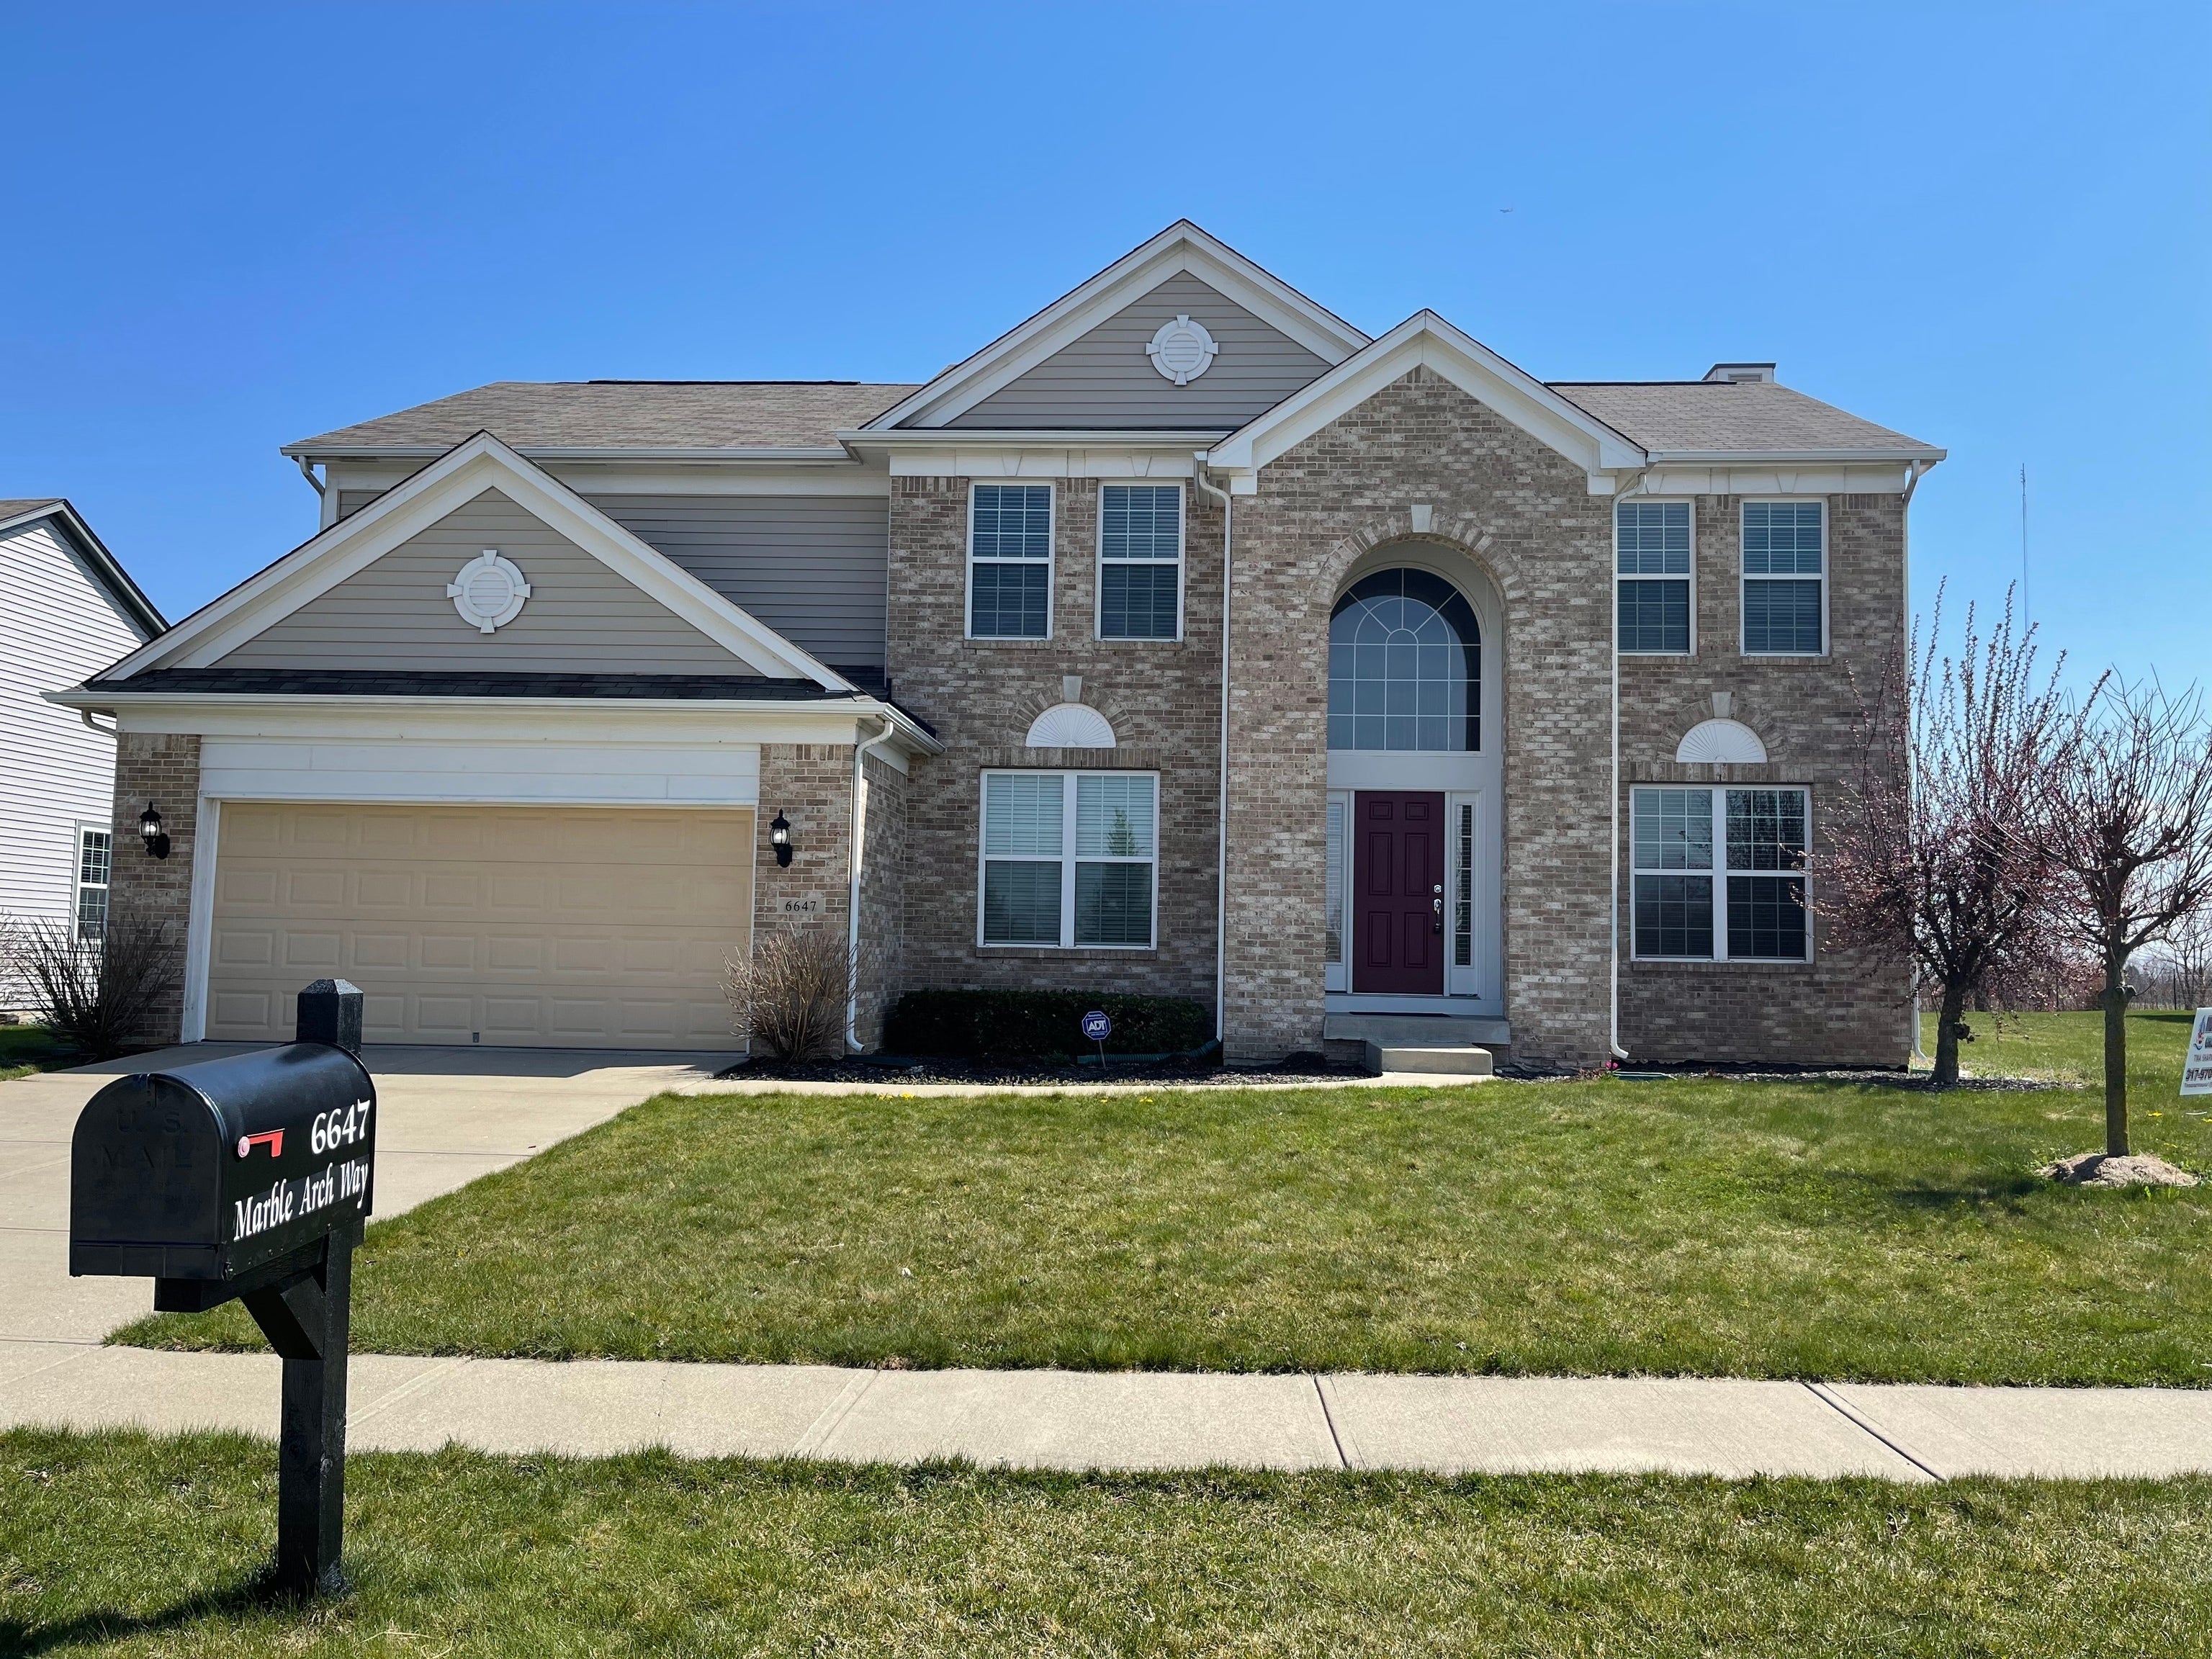 Photo of 6647 Marble Arch Way Indianapolis, IN 46259